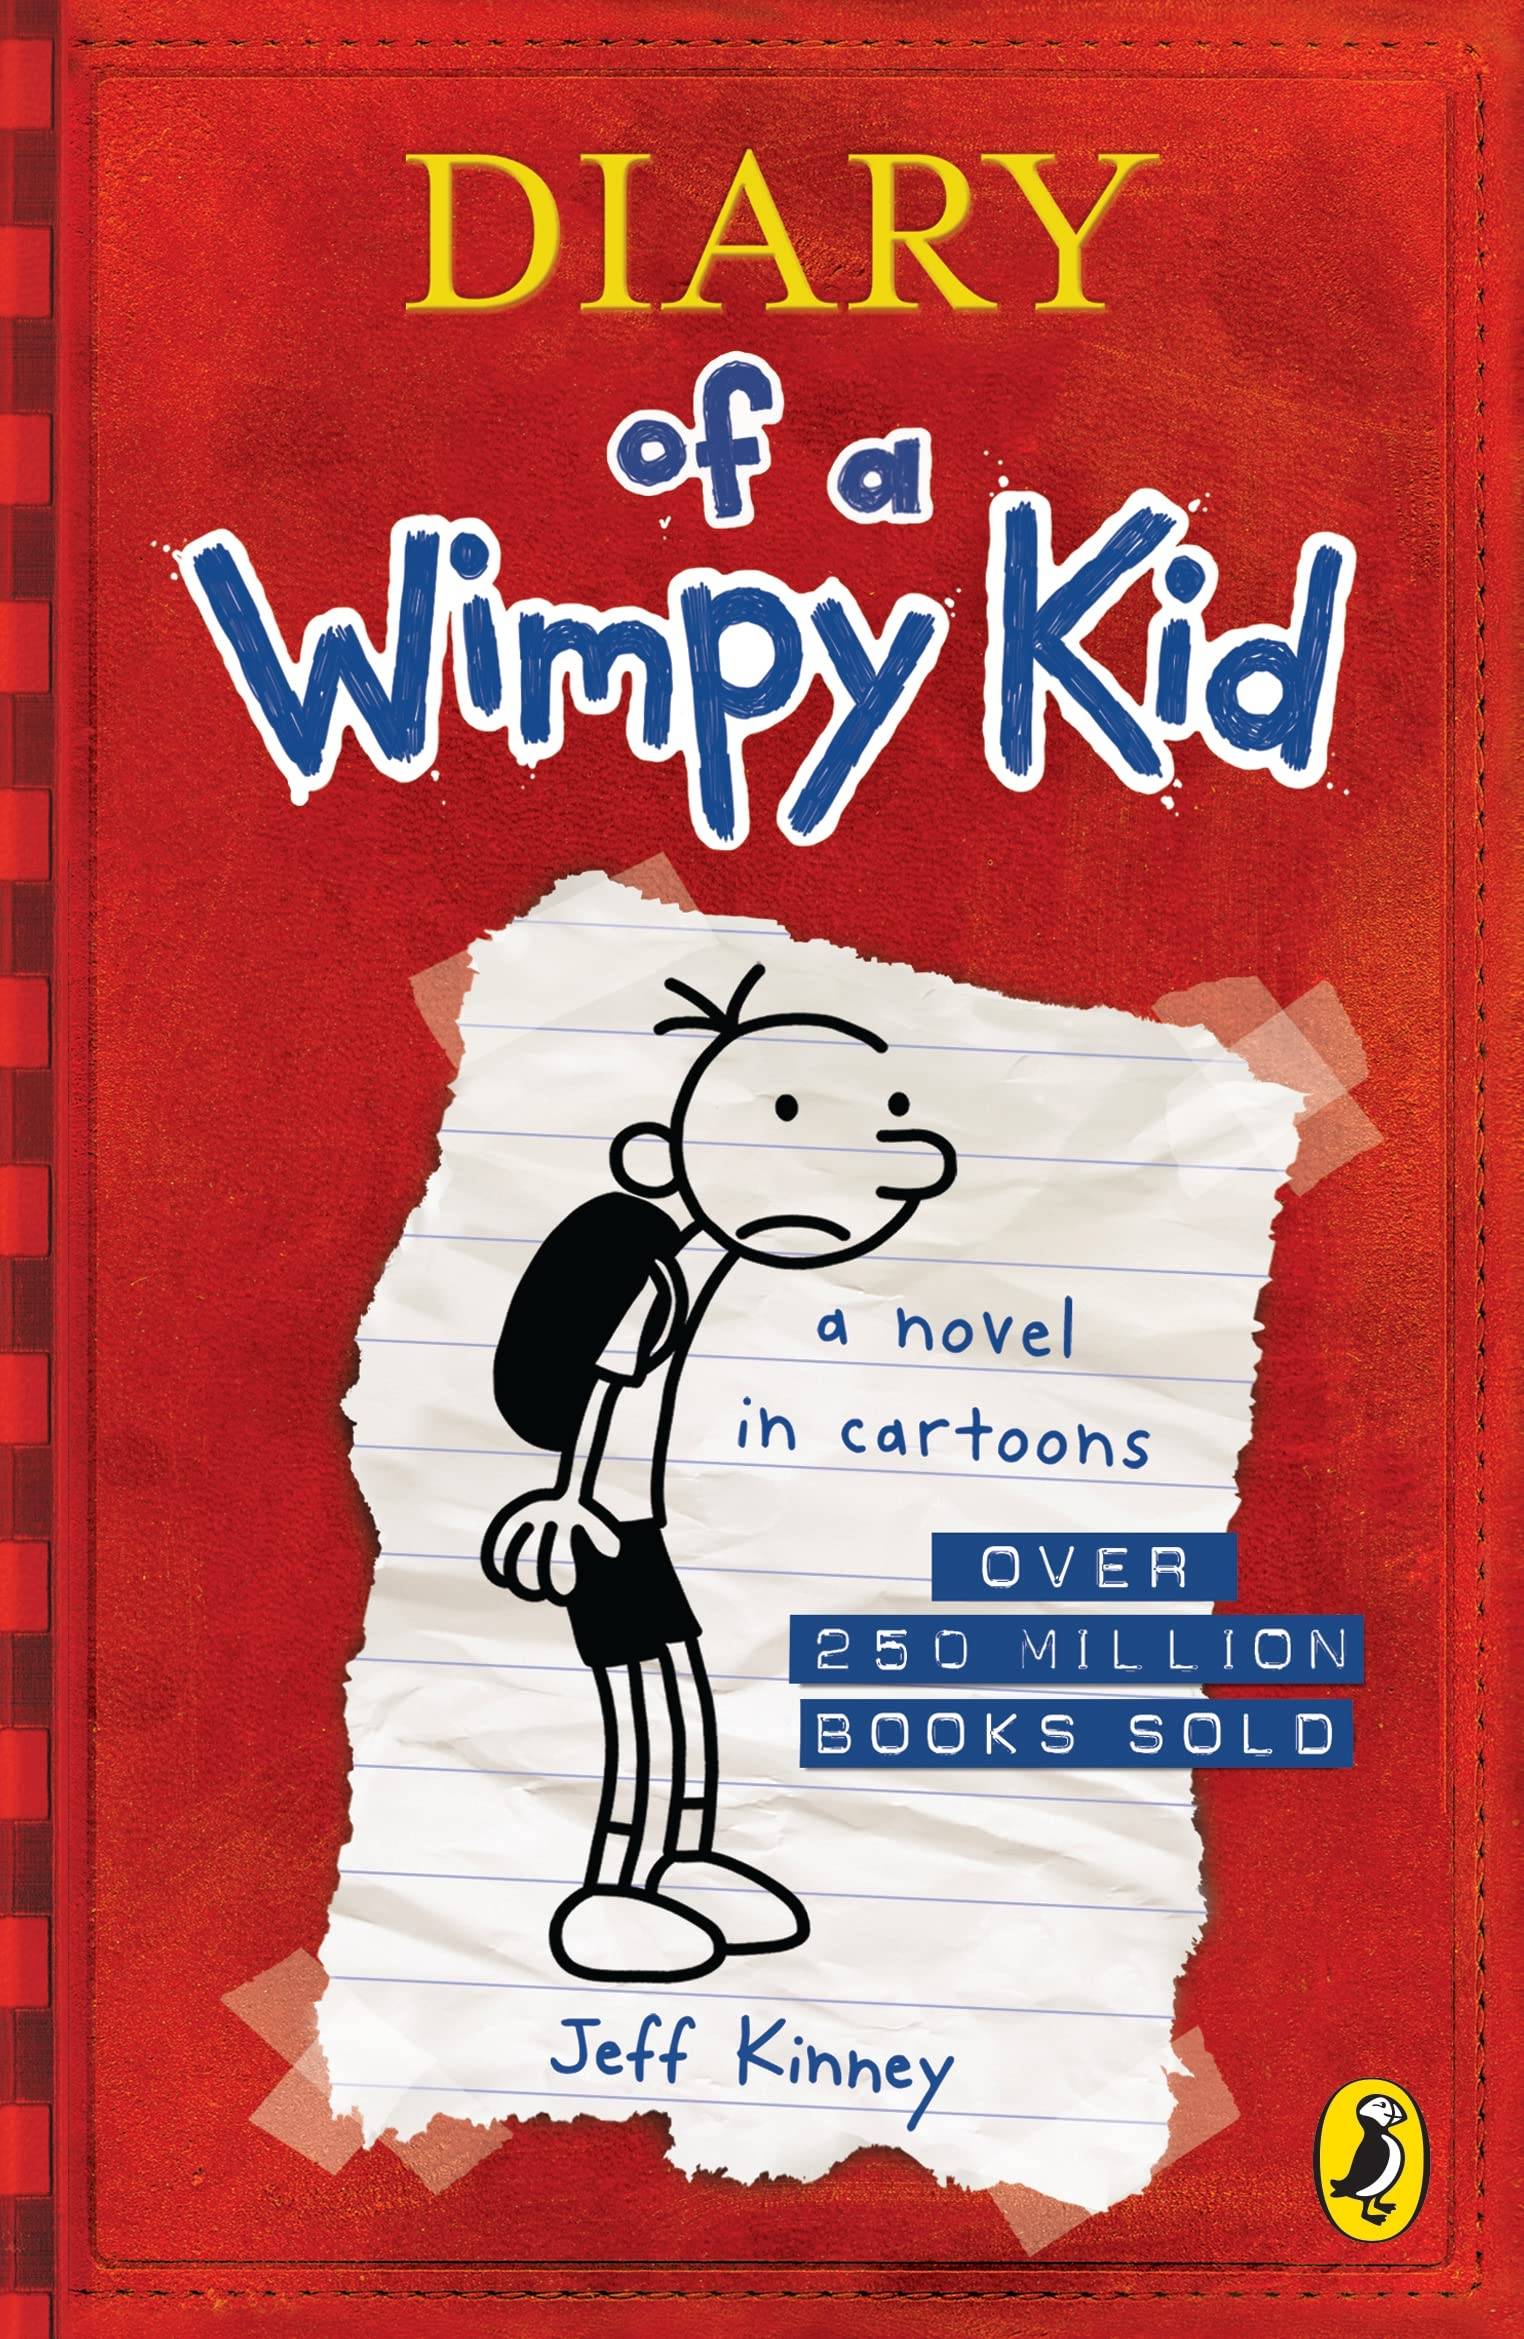 IMG : The Diary of Wimpy kid